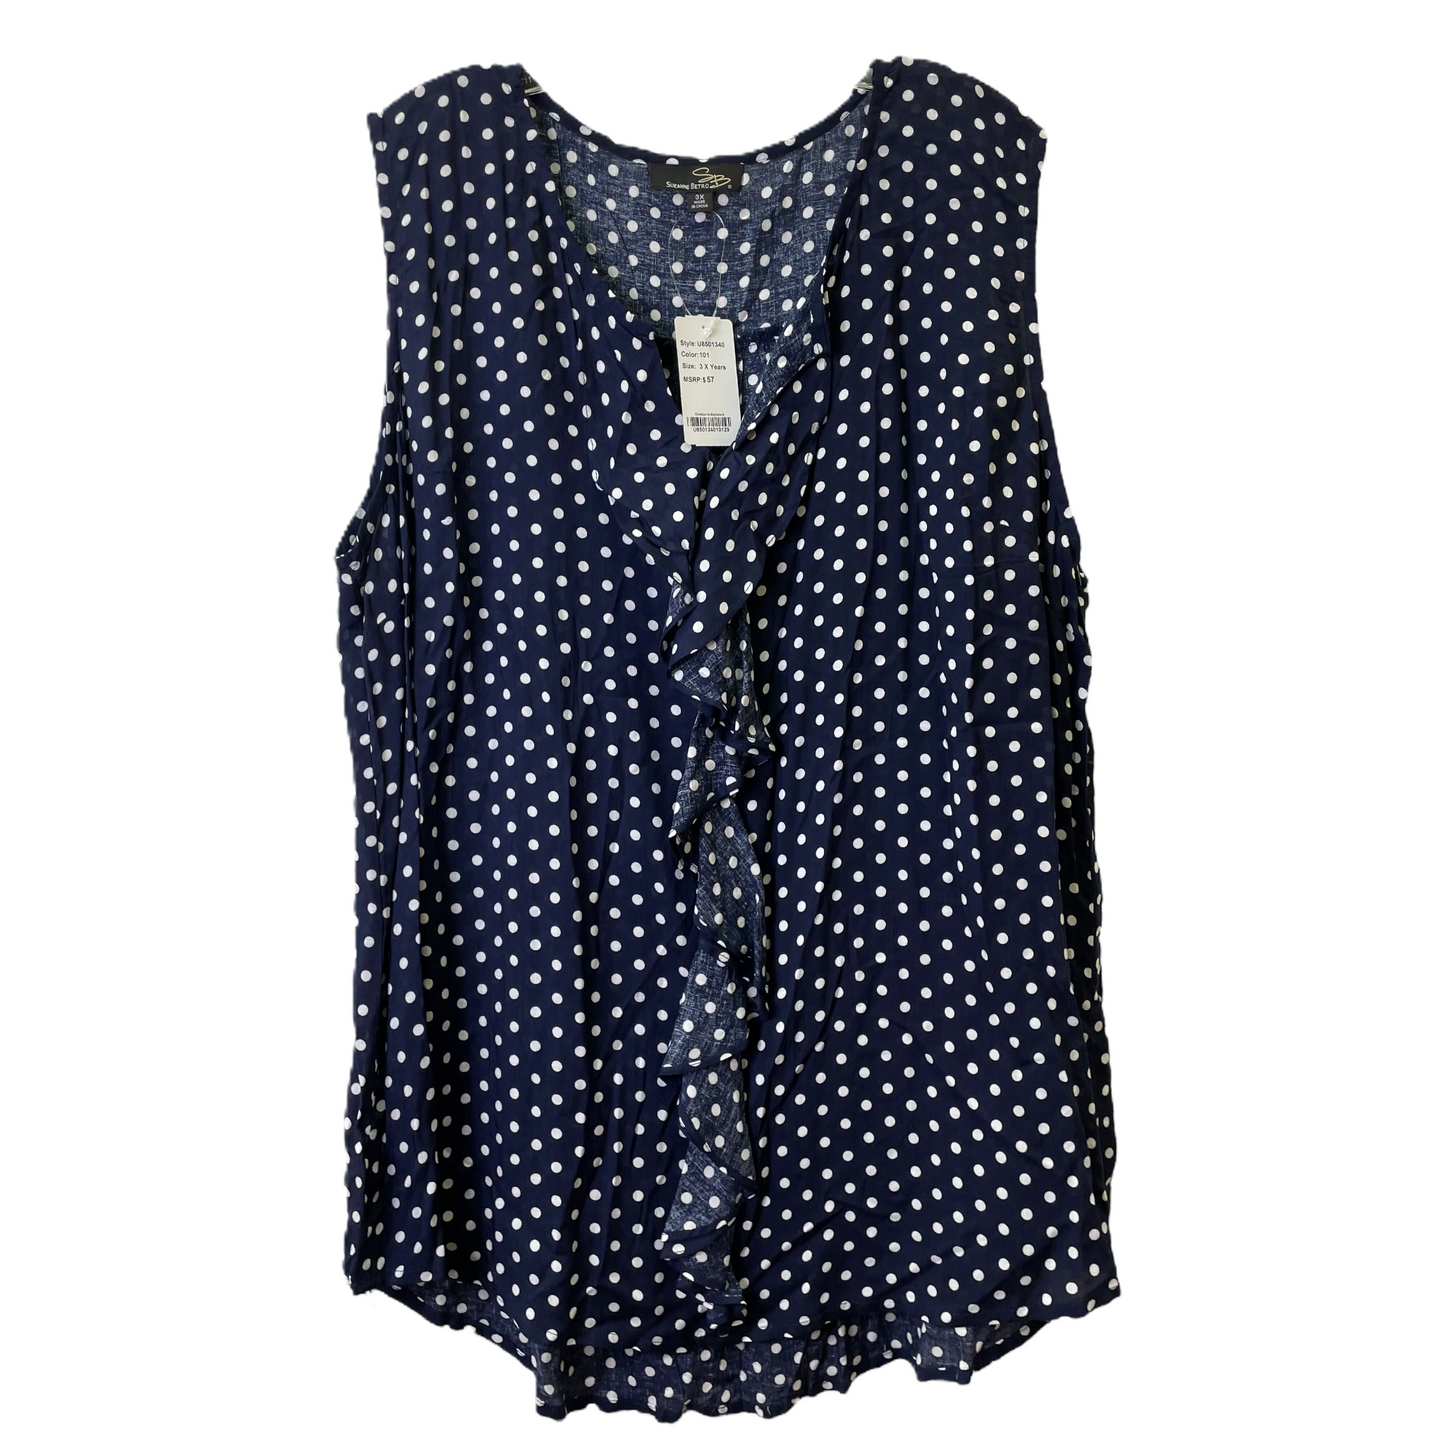 Blue Top Sleeveless By Suzanne Betro, Size: 3x